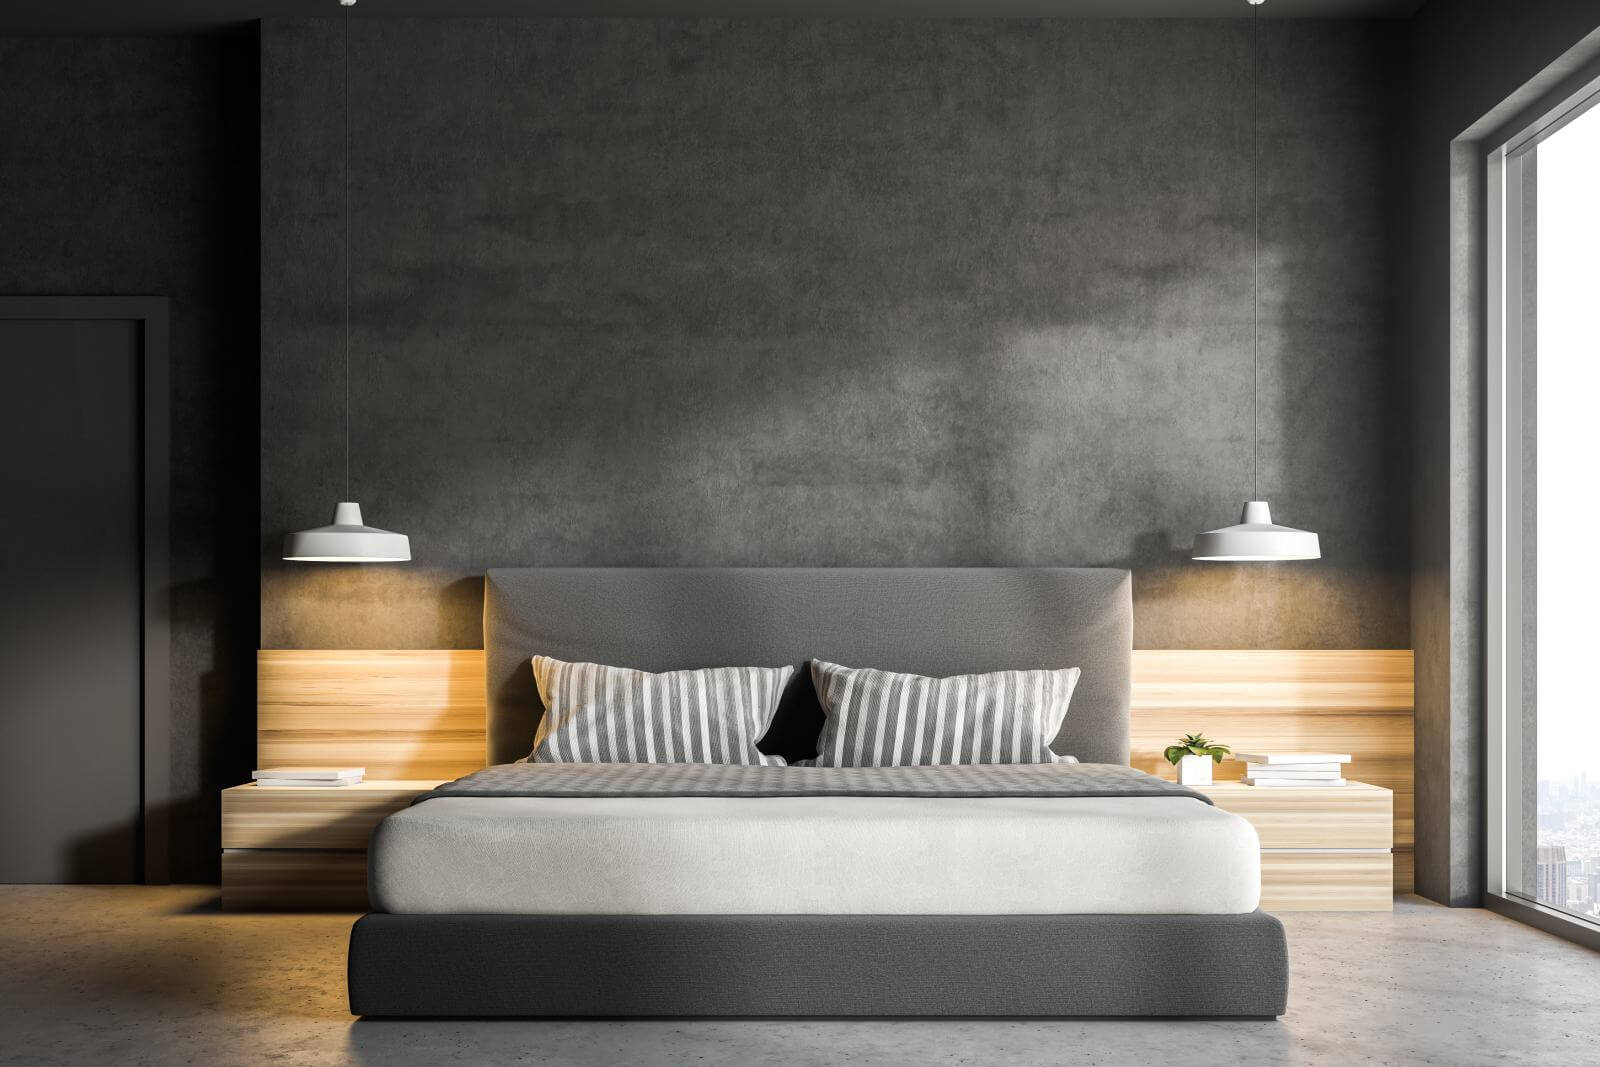 Interior of a modern bedroom with gray walls, a concrete floor, a double bed and two bedside tables. 3d rendering mock up